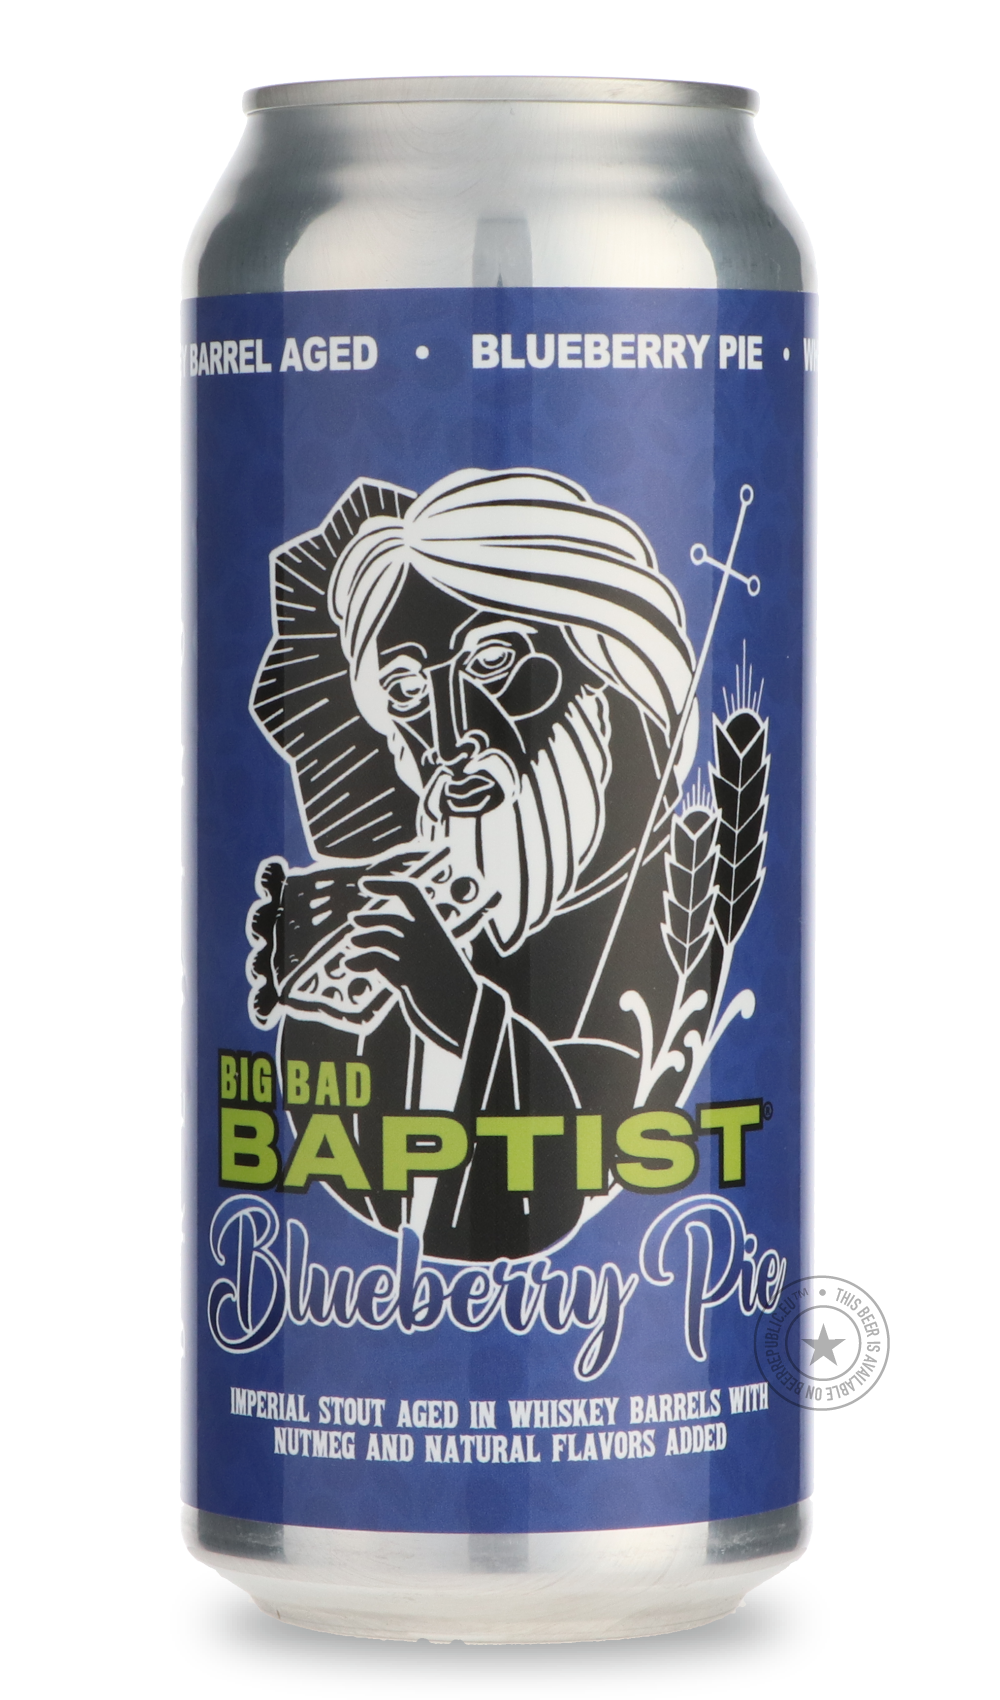 -Epic- Big Bad Baptist Blueberry Pie-Stout & Porter- Only @ Beer Republic - The best online beer store for American & Canadian craft beer - Buy beer online from the USA and Canada - Bier online kopen - Amerikaans bier kopen - Craft beer store - Craft beer kopen - Amerikanisch bier kaufen - Bier online kaufen - Acheter biere online - IPA - Stout - Porter - New England IPA - Hazy IPA - Imperial Stout - Barrel Aged - Barrel Aged Imperial Stout - Brown - Dark beer - Blond - Blonde - Pilsner - Lager - Wheat - We